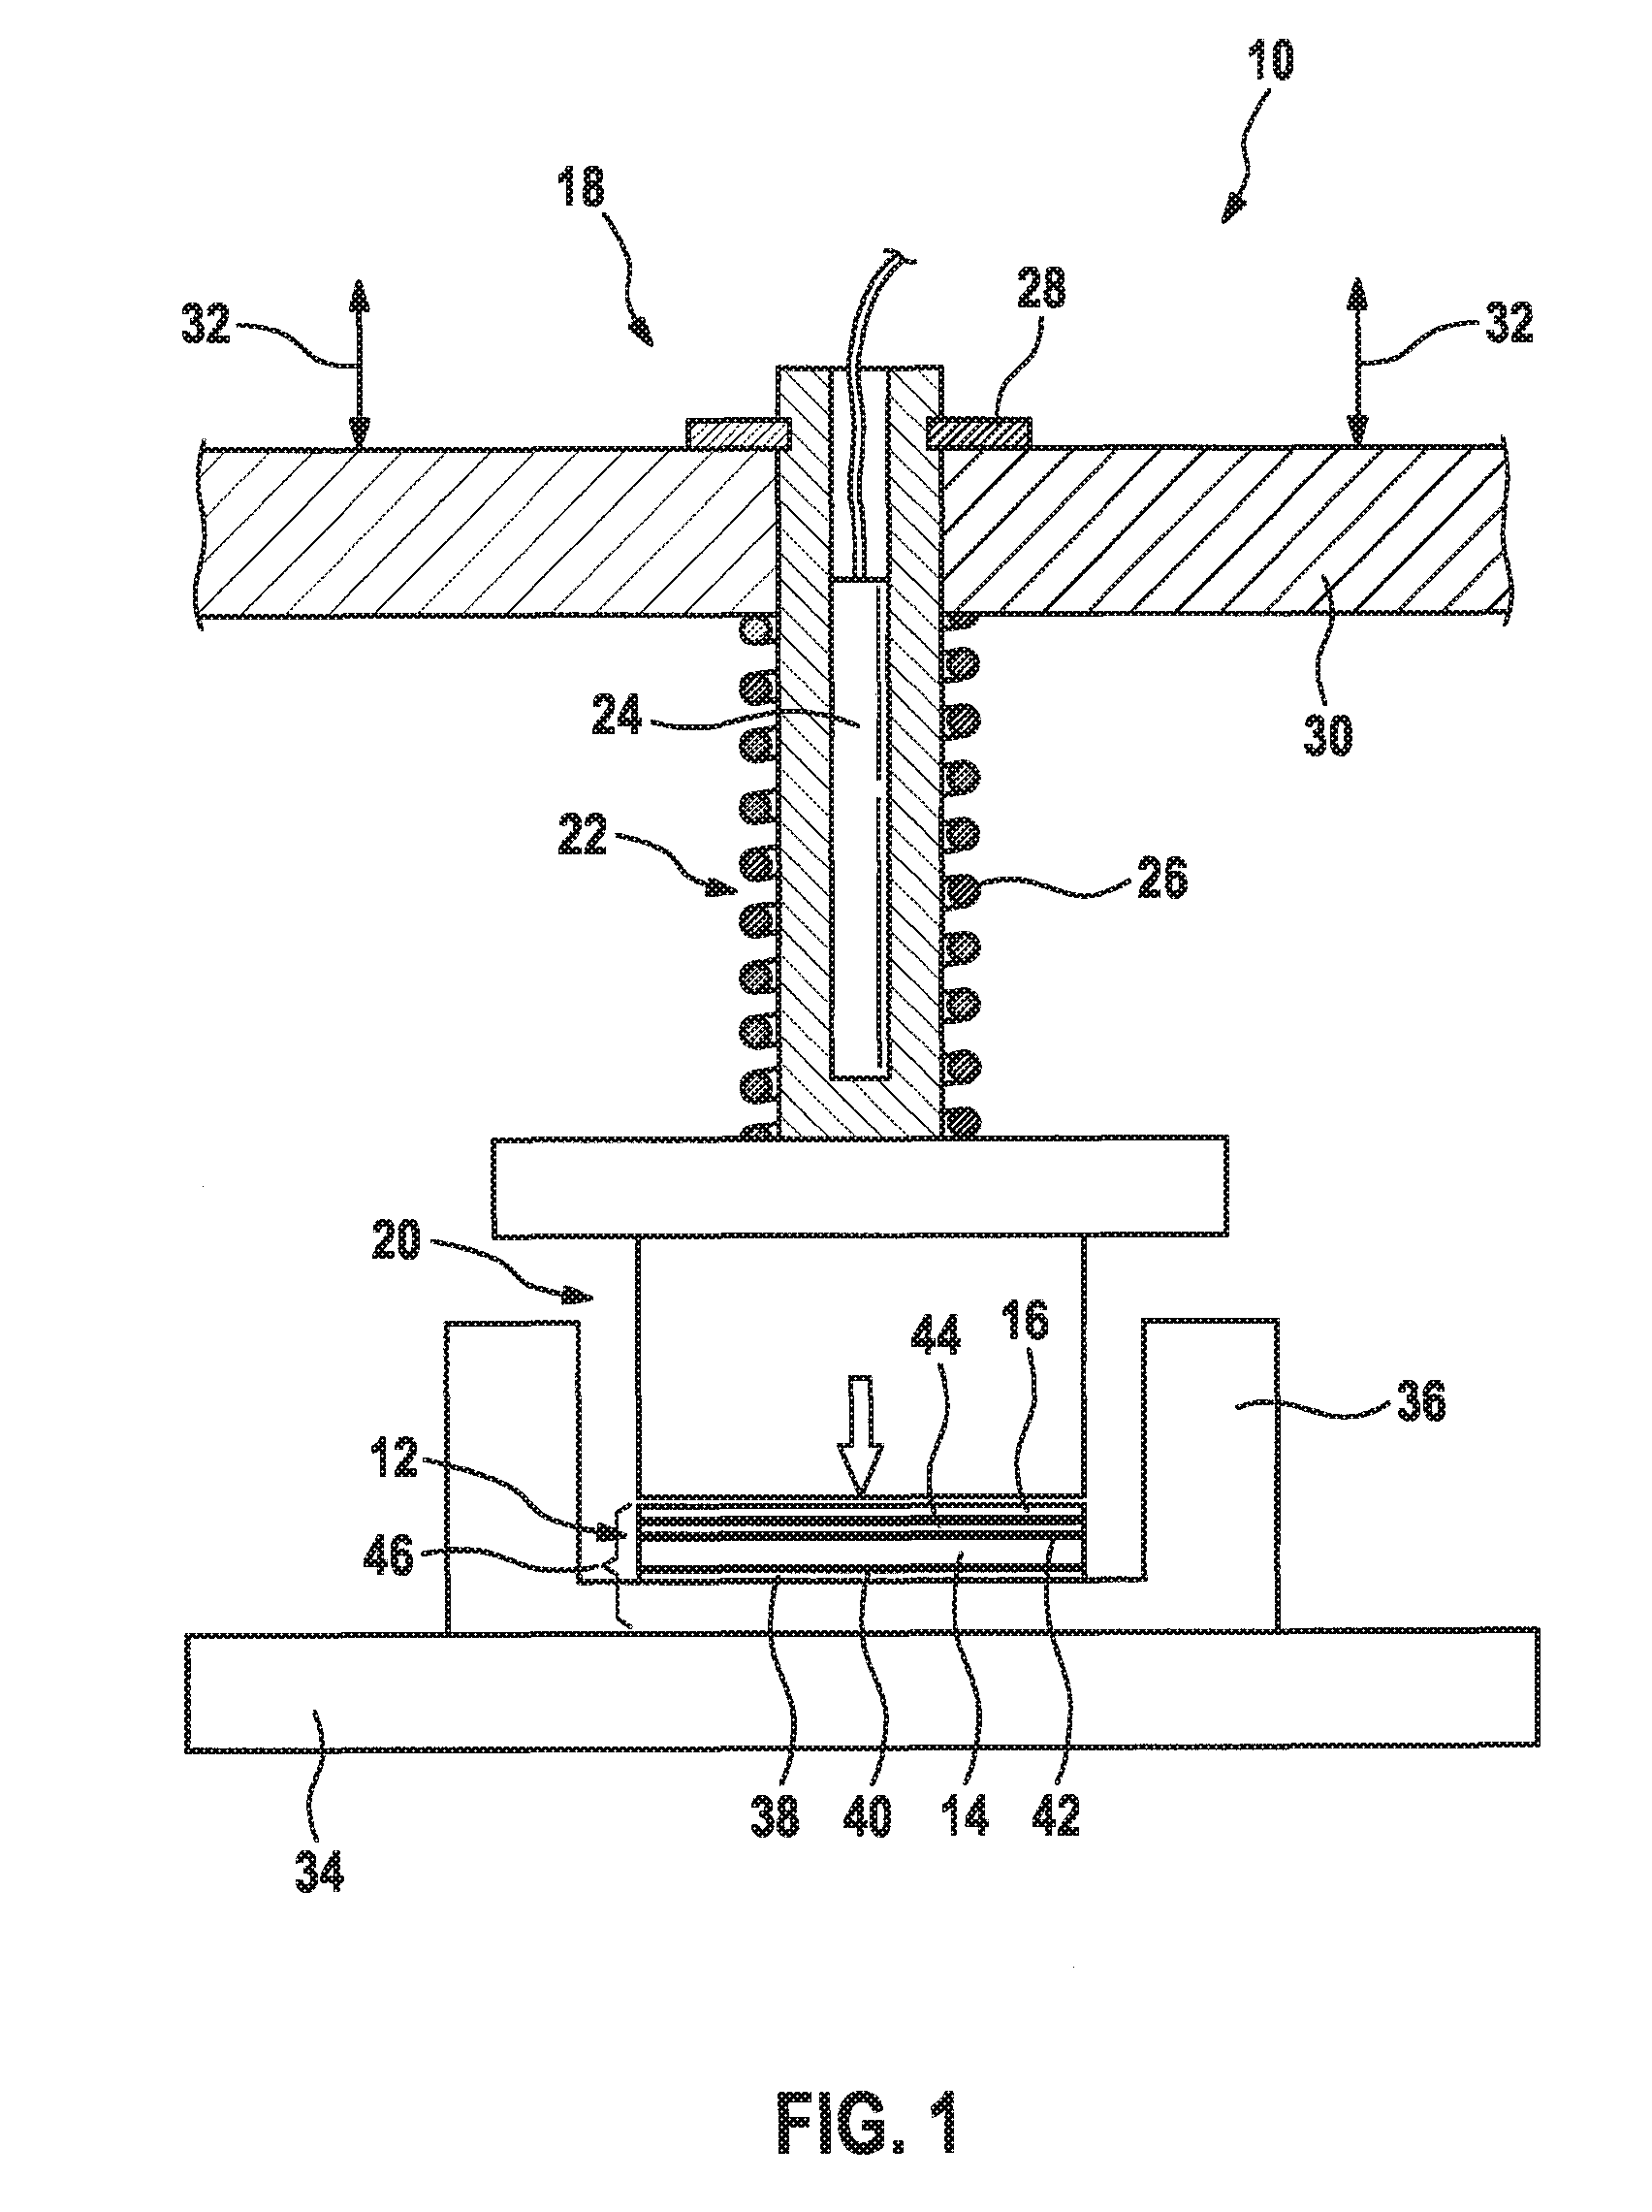 Method for electrically contacting a piezoelectric ceramic